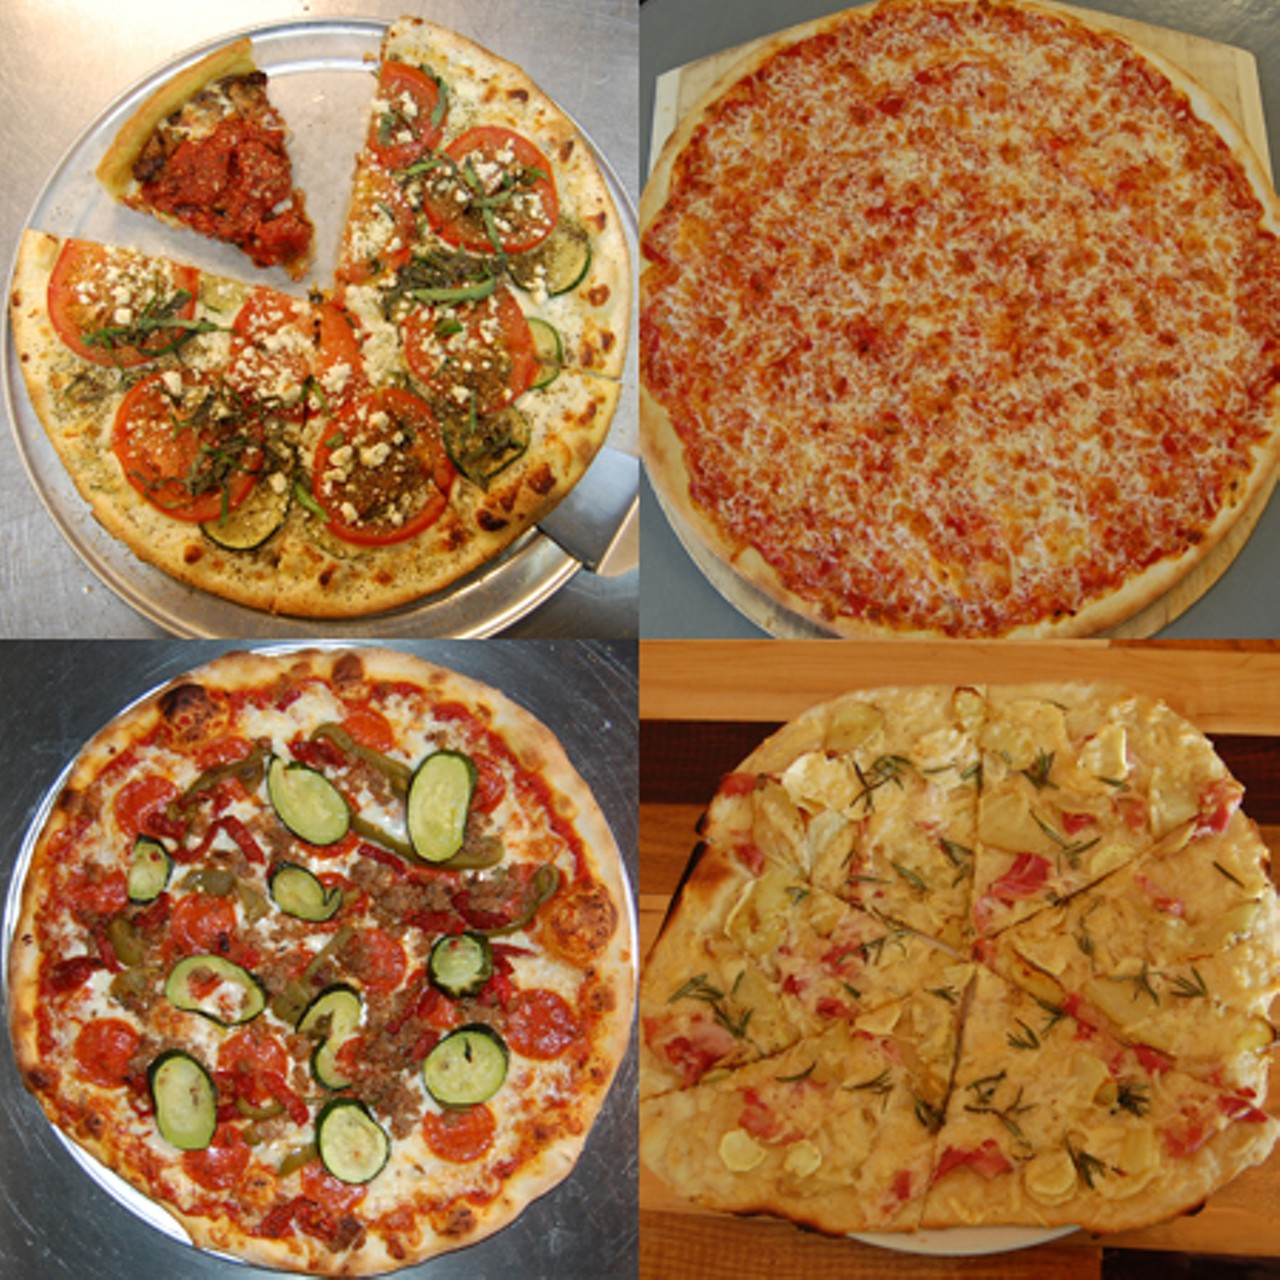 Clockwise from the top-left: Pi, Bridge & Tunnel, Onesto and Katie's Pizzeria Cafe.